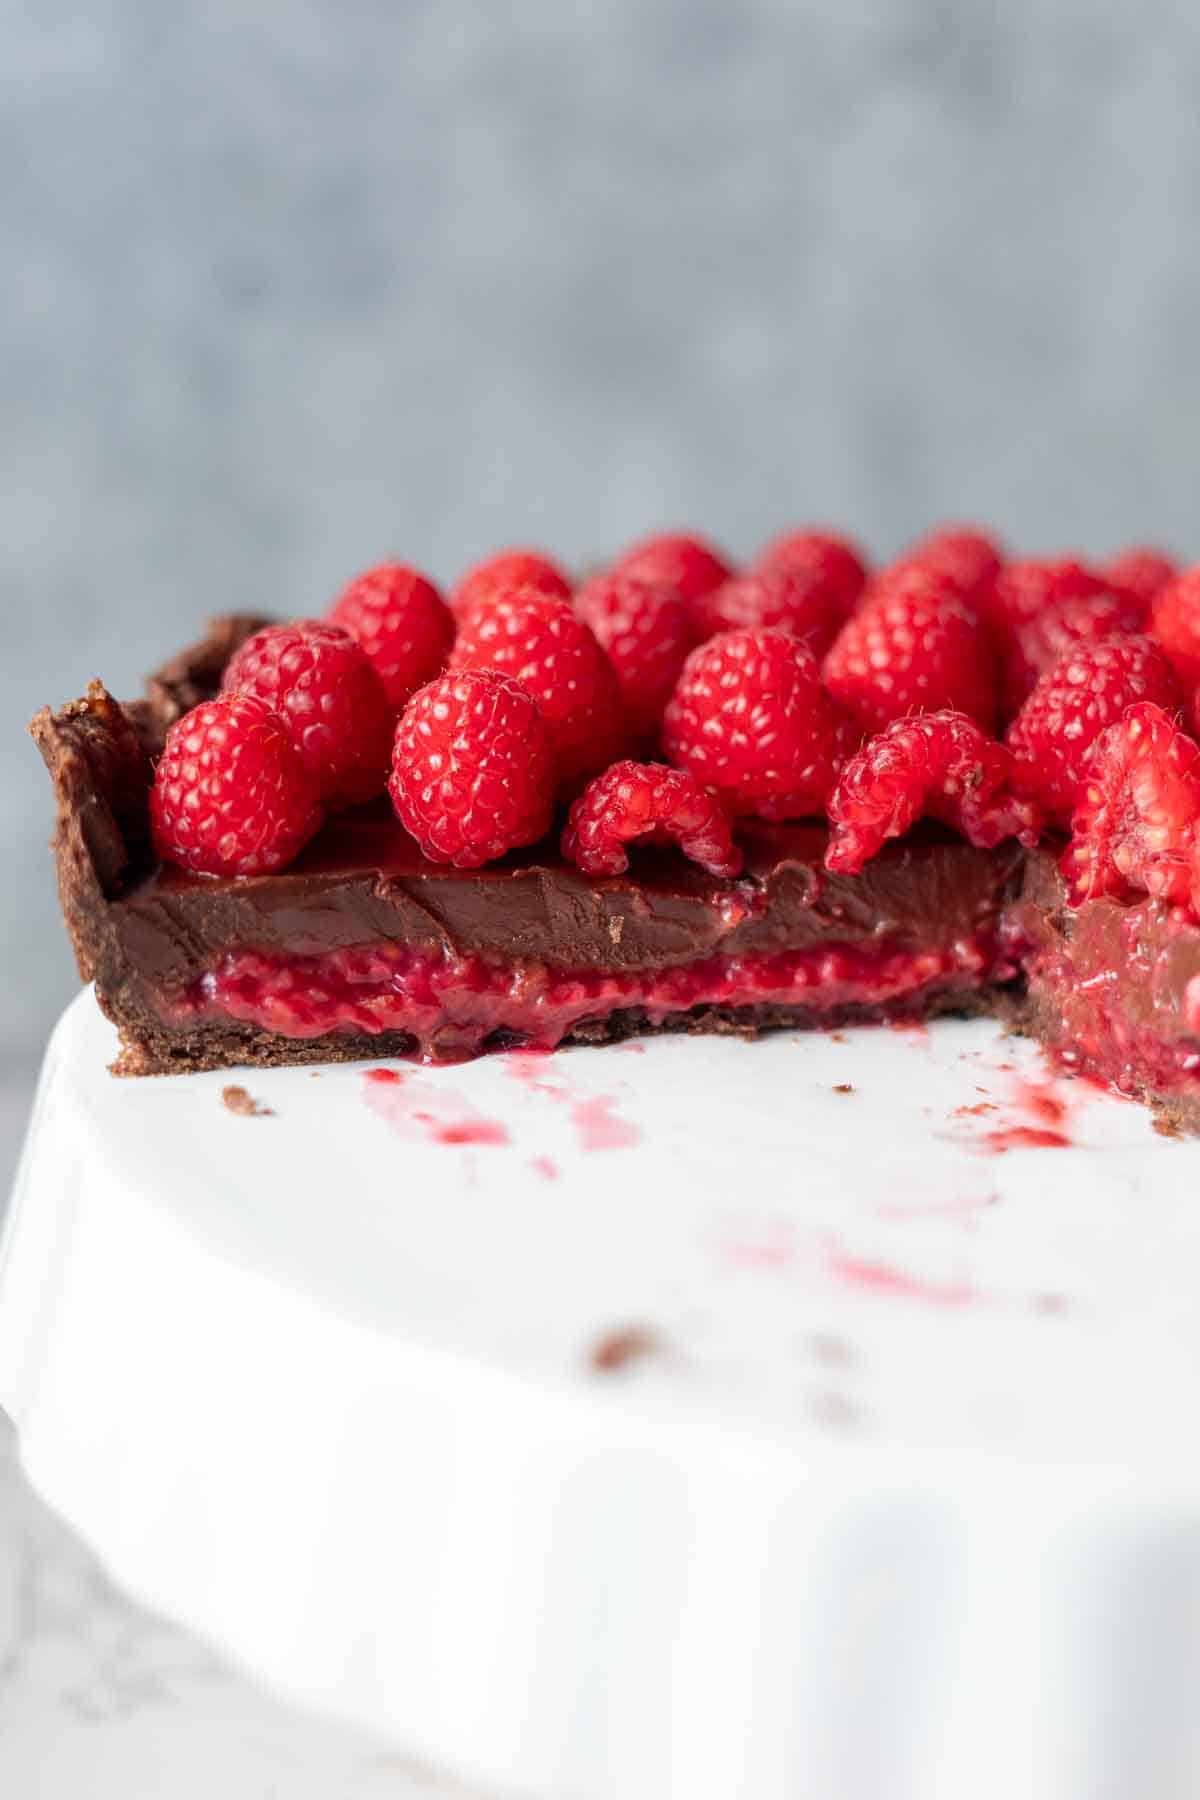 Close photo of raspberry and chocolate layered in the tart and topped with fresh raspberries.